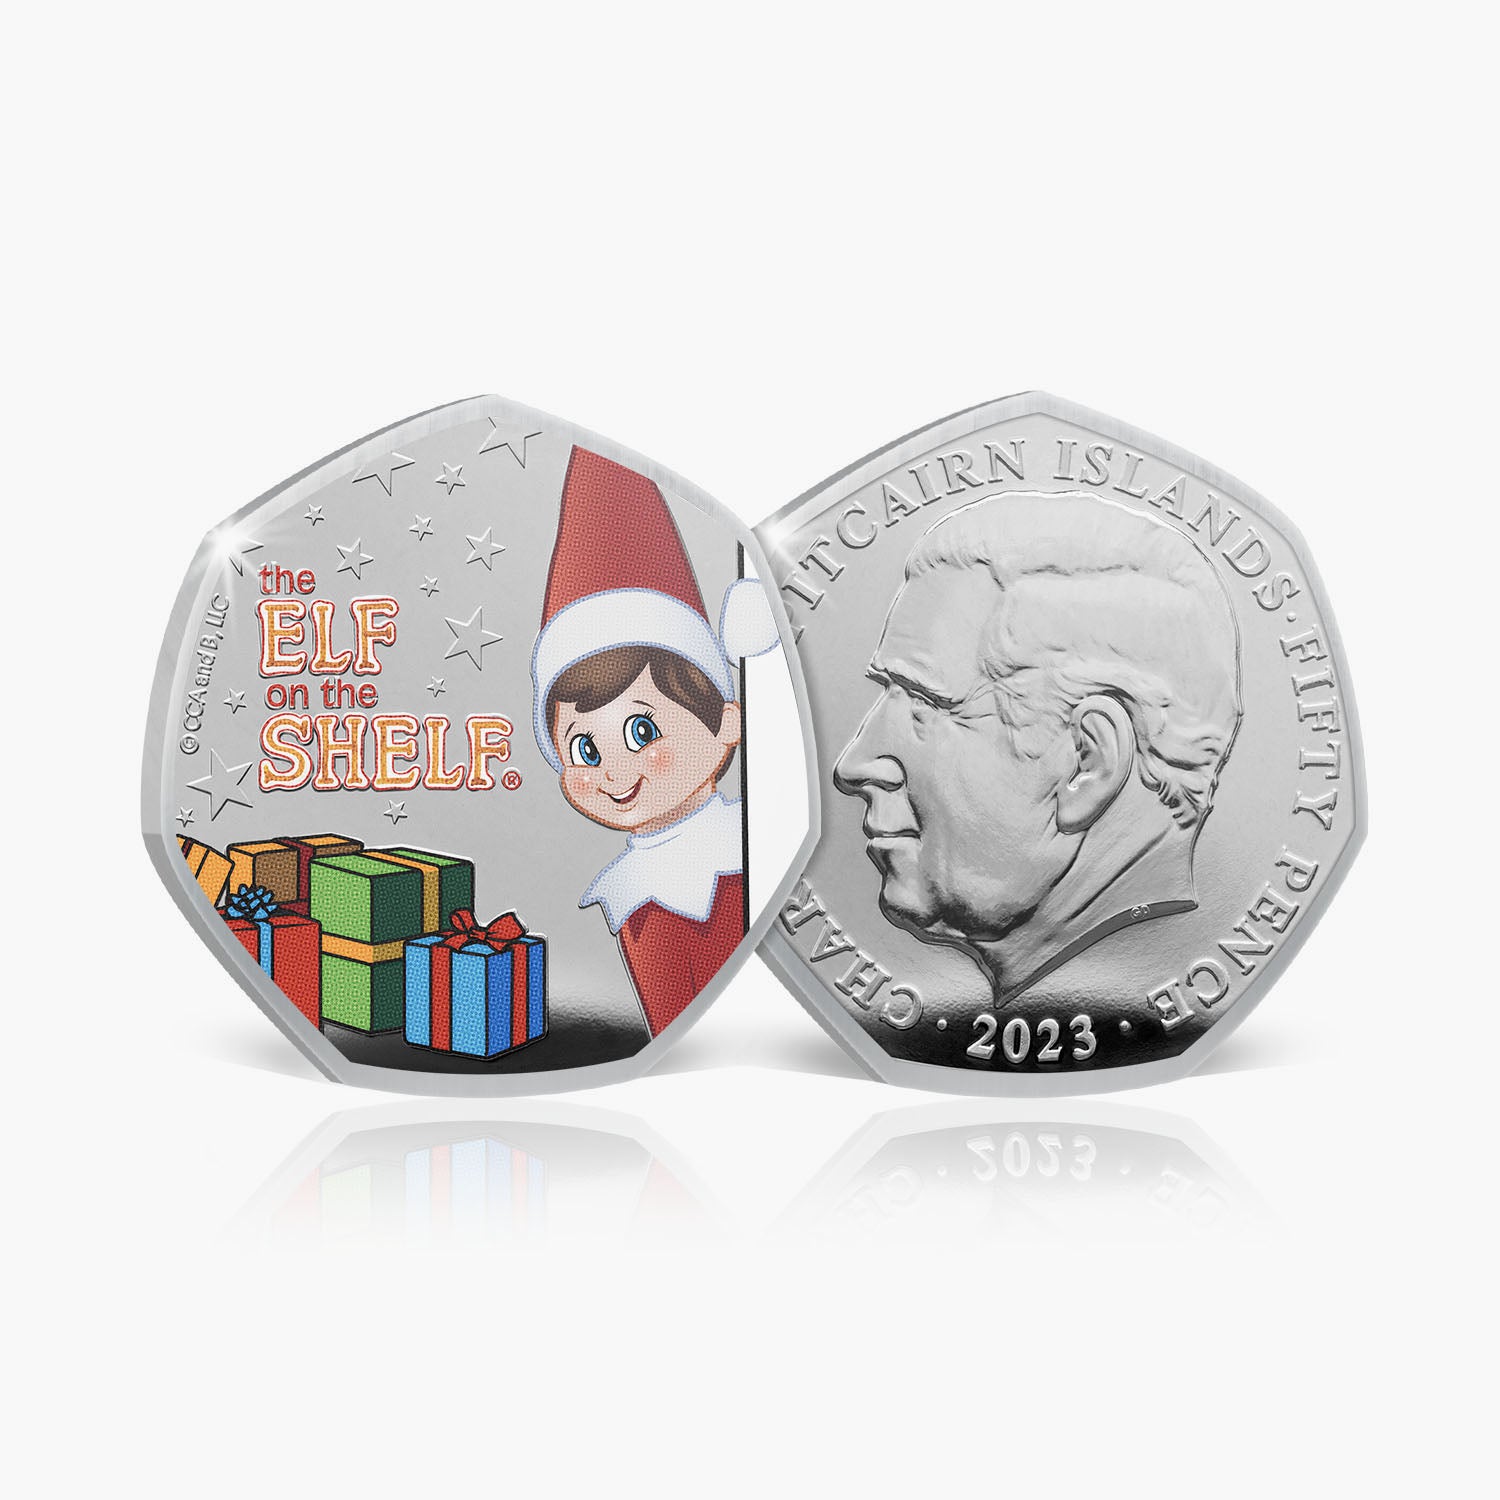 The Official 2023 Elf on the Shelf BU 50p Coloured Coin in Christmas Card Coin